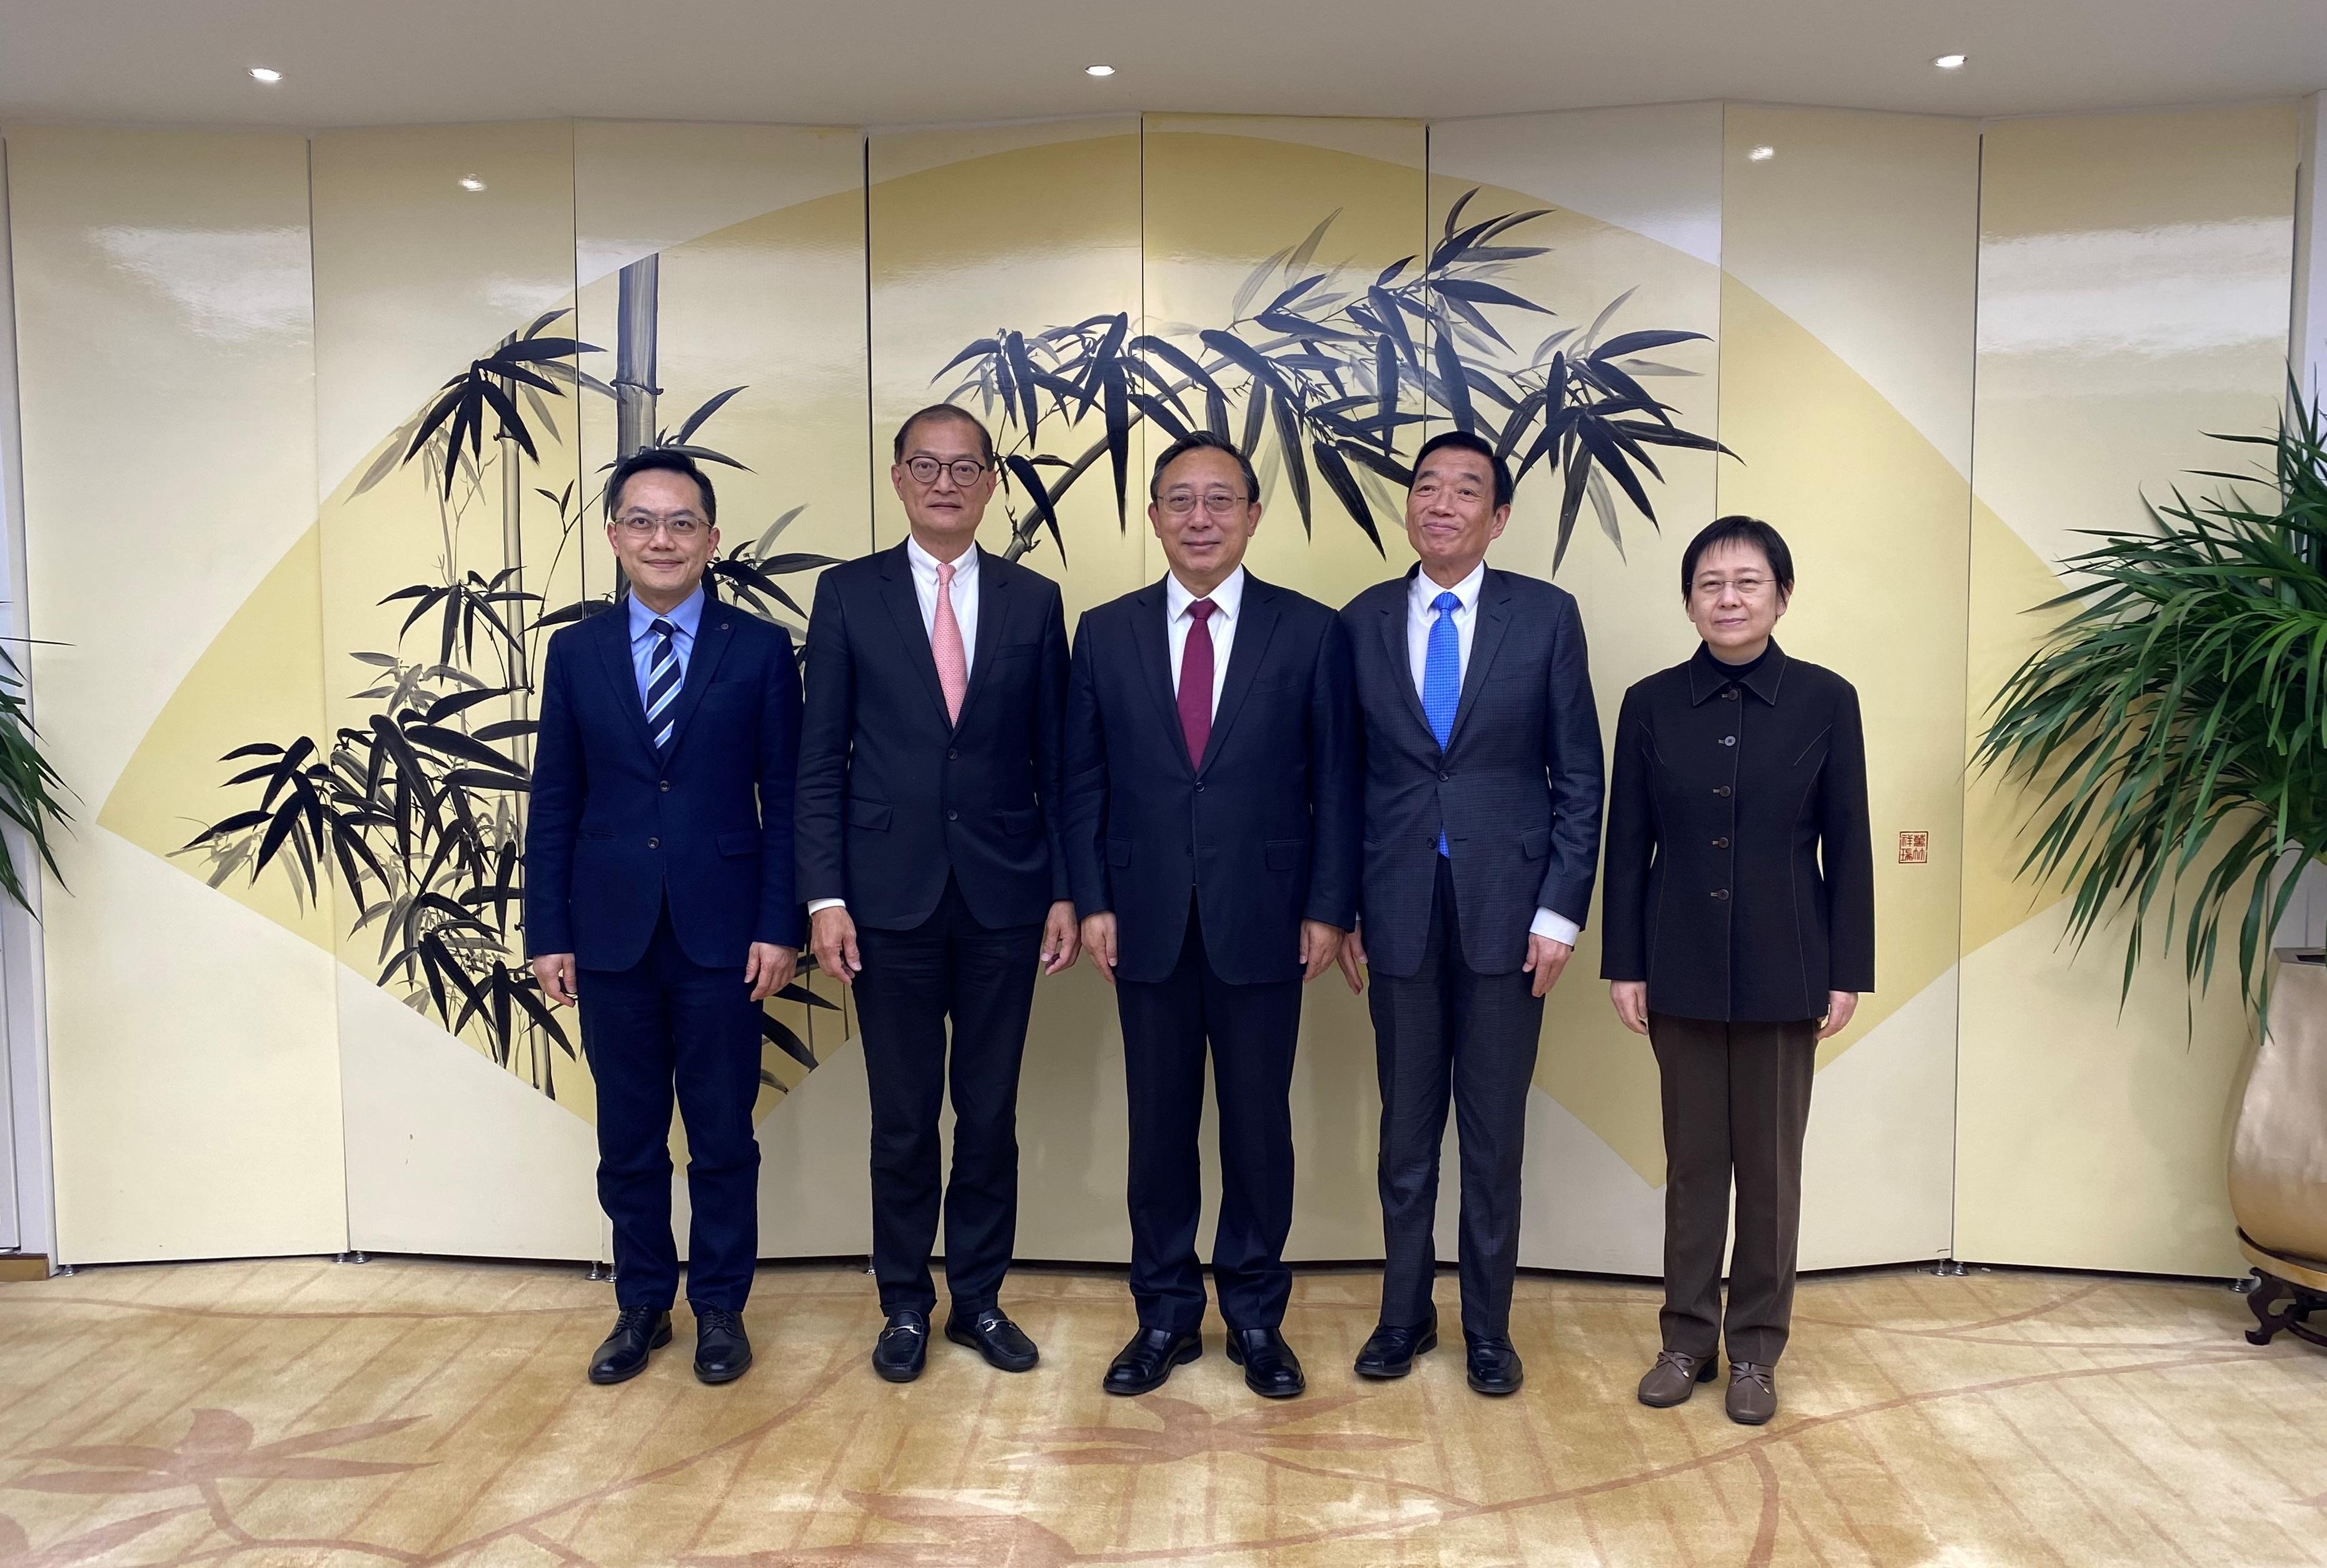 The Secretary for Health, Professor Lo Chung-mau, and his delegation called on the National Health Commission (NHC) today (March 16). Photo shows Professor Lo (second left); the Vice-minister of the NHC, Mr Cao Xuetao (centre); the Director General of the Office of Hong Kong, Macao and Taiwan Affairs of the NHC, Ms Zhang Yang (first right); the Director of Health, Dr Ronald Lam (first left); and the Chairman of the Hospital Authority, Mr Henry Fan (second right).